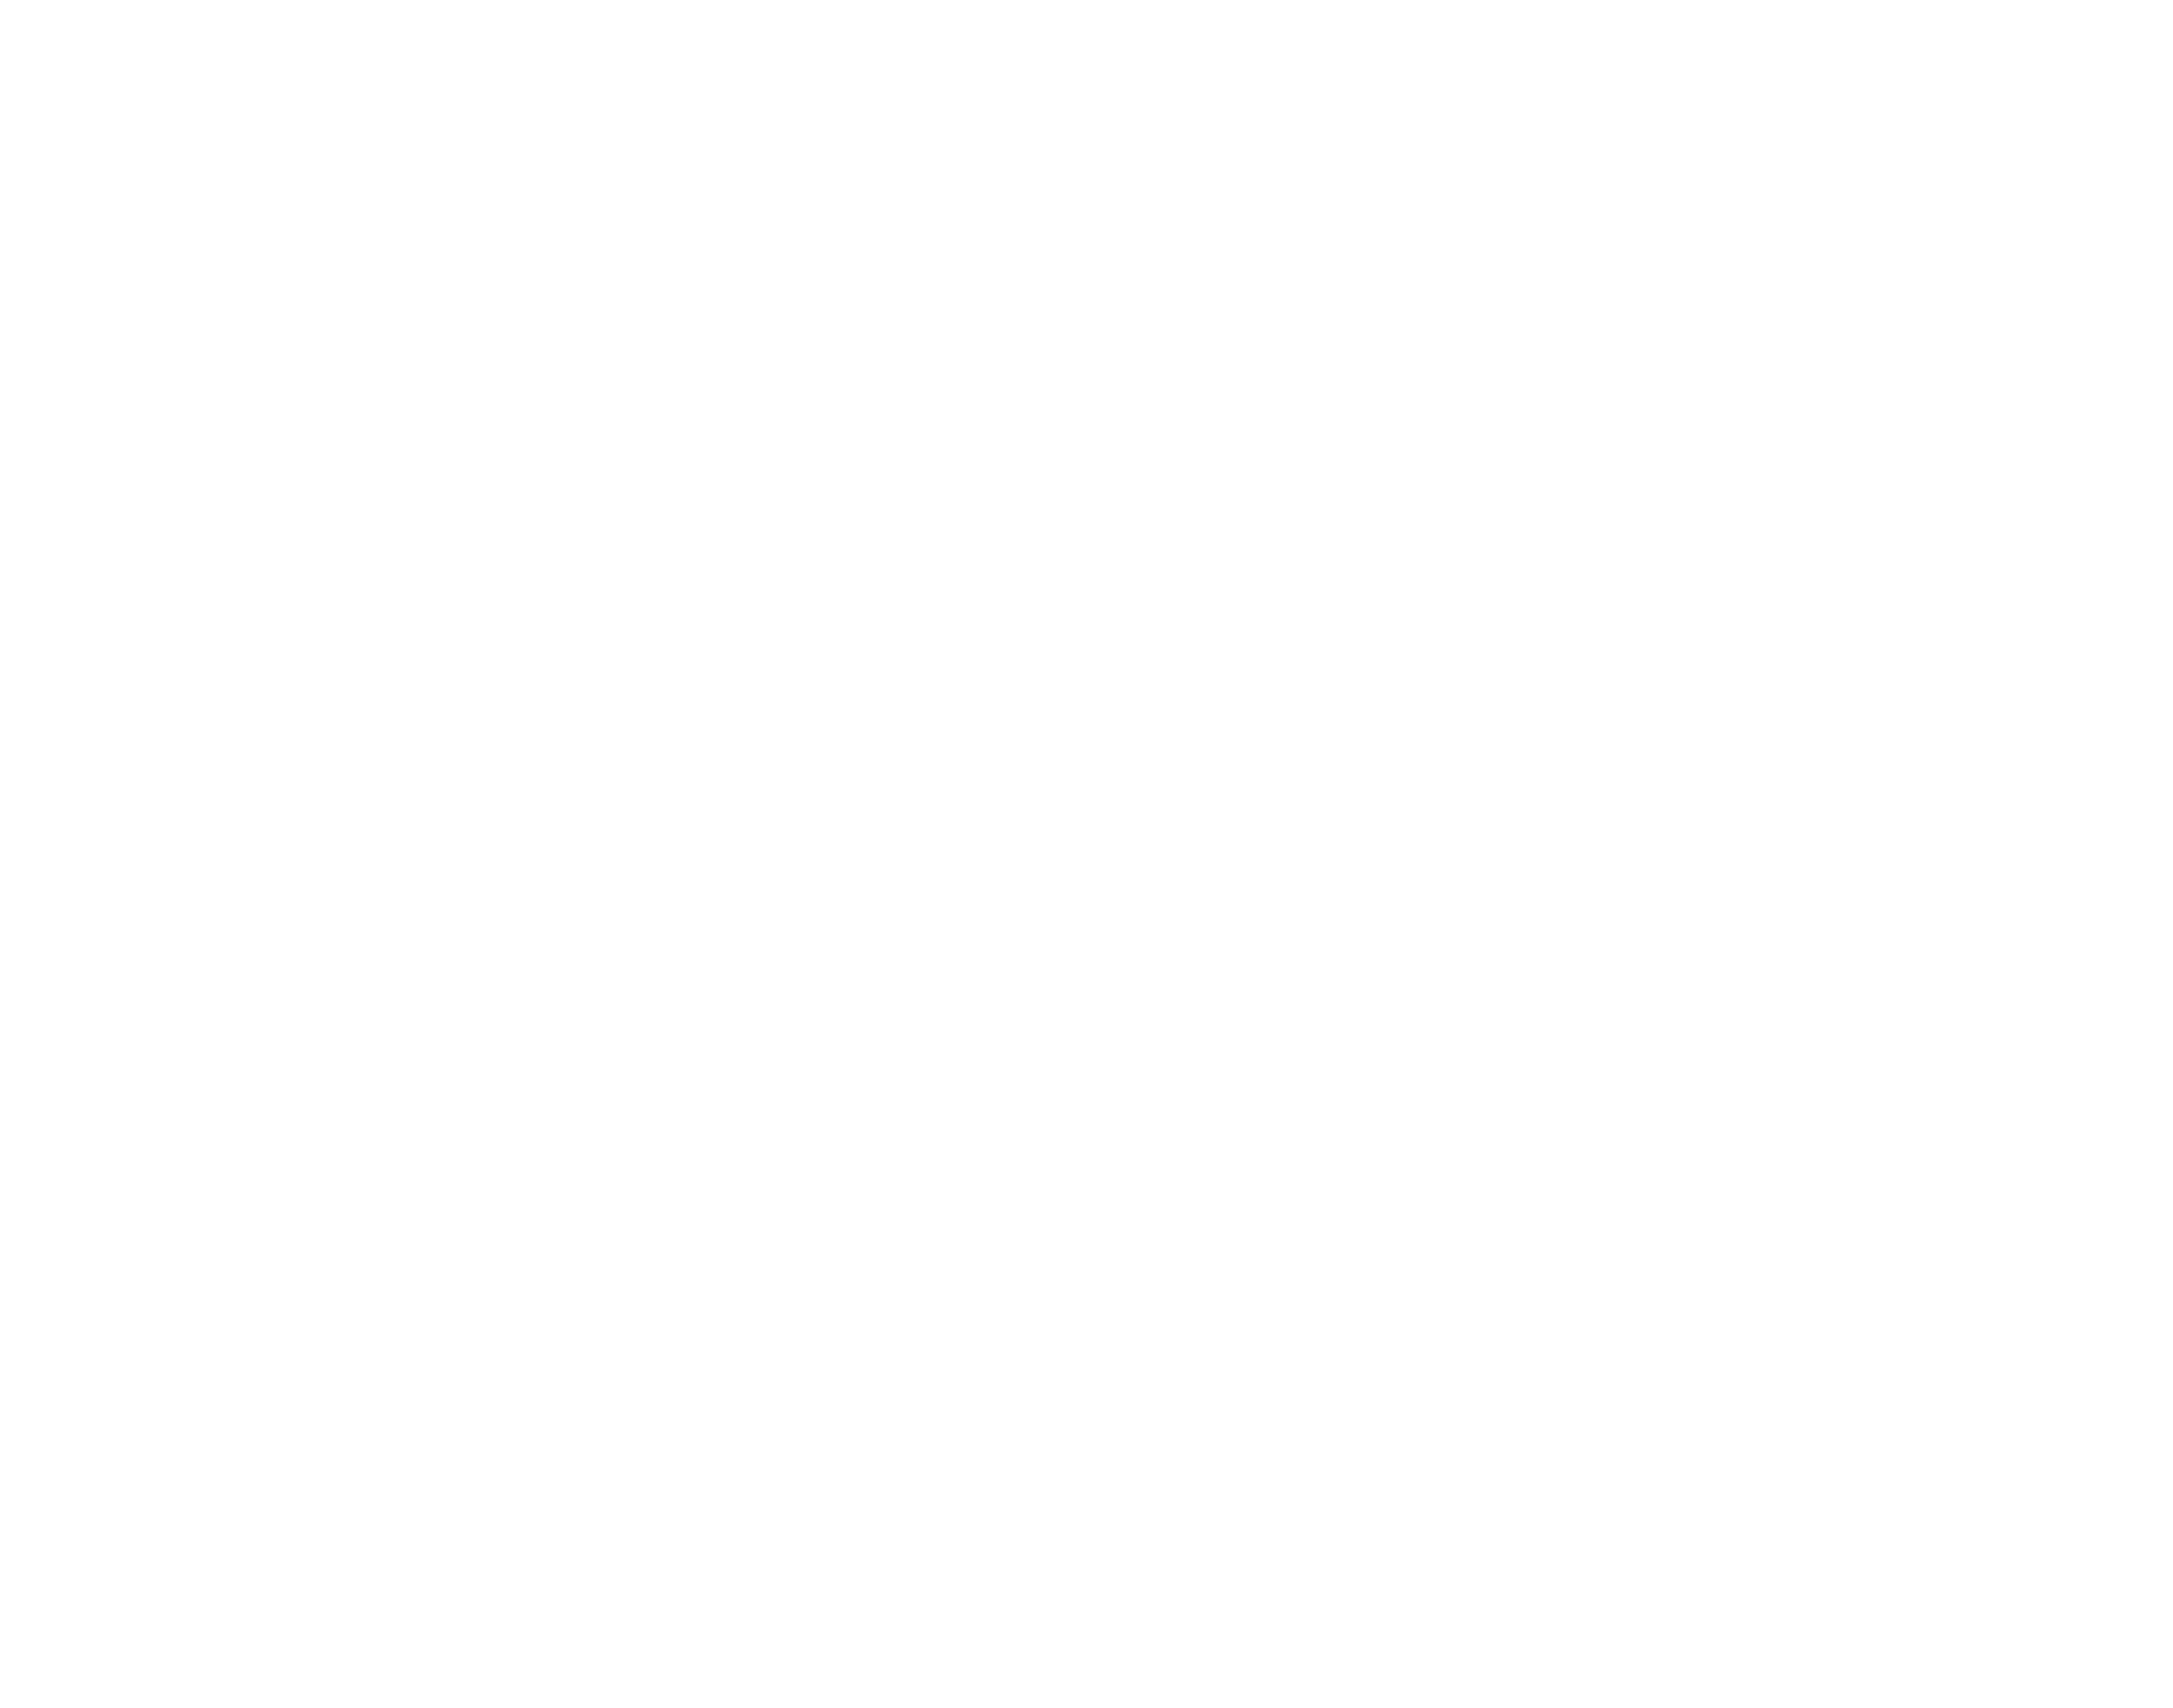 2024_LOGOS CANNES_WHITE_SELECTION_ENG_UCR